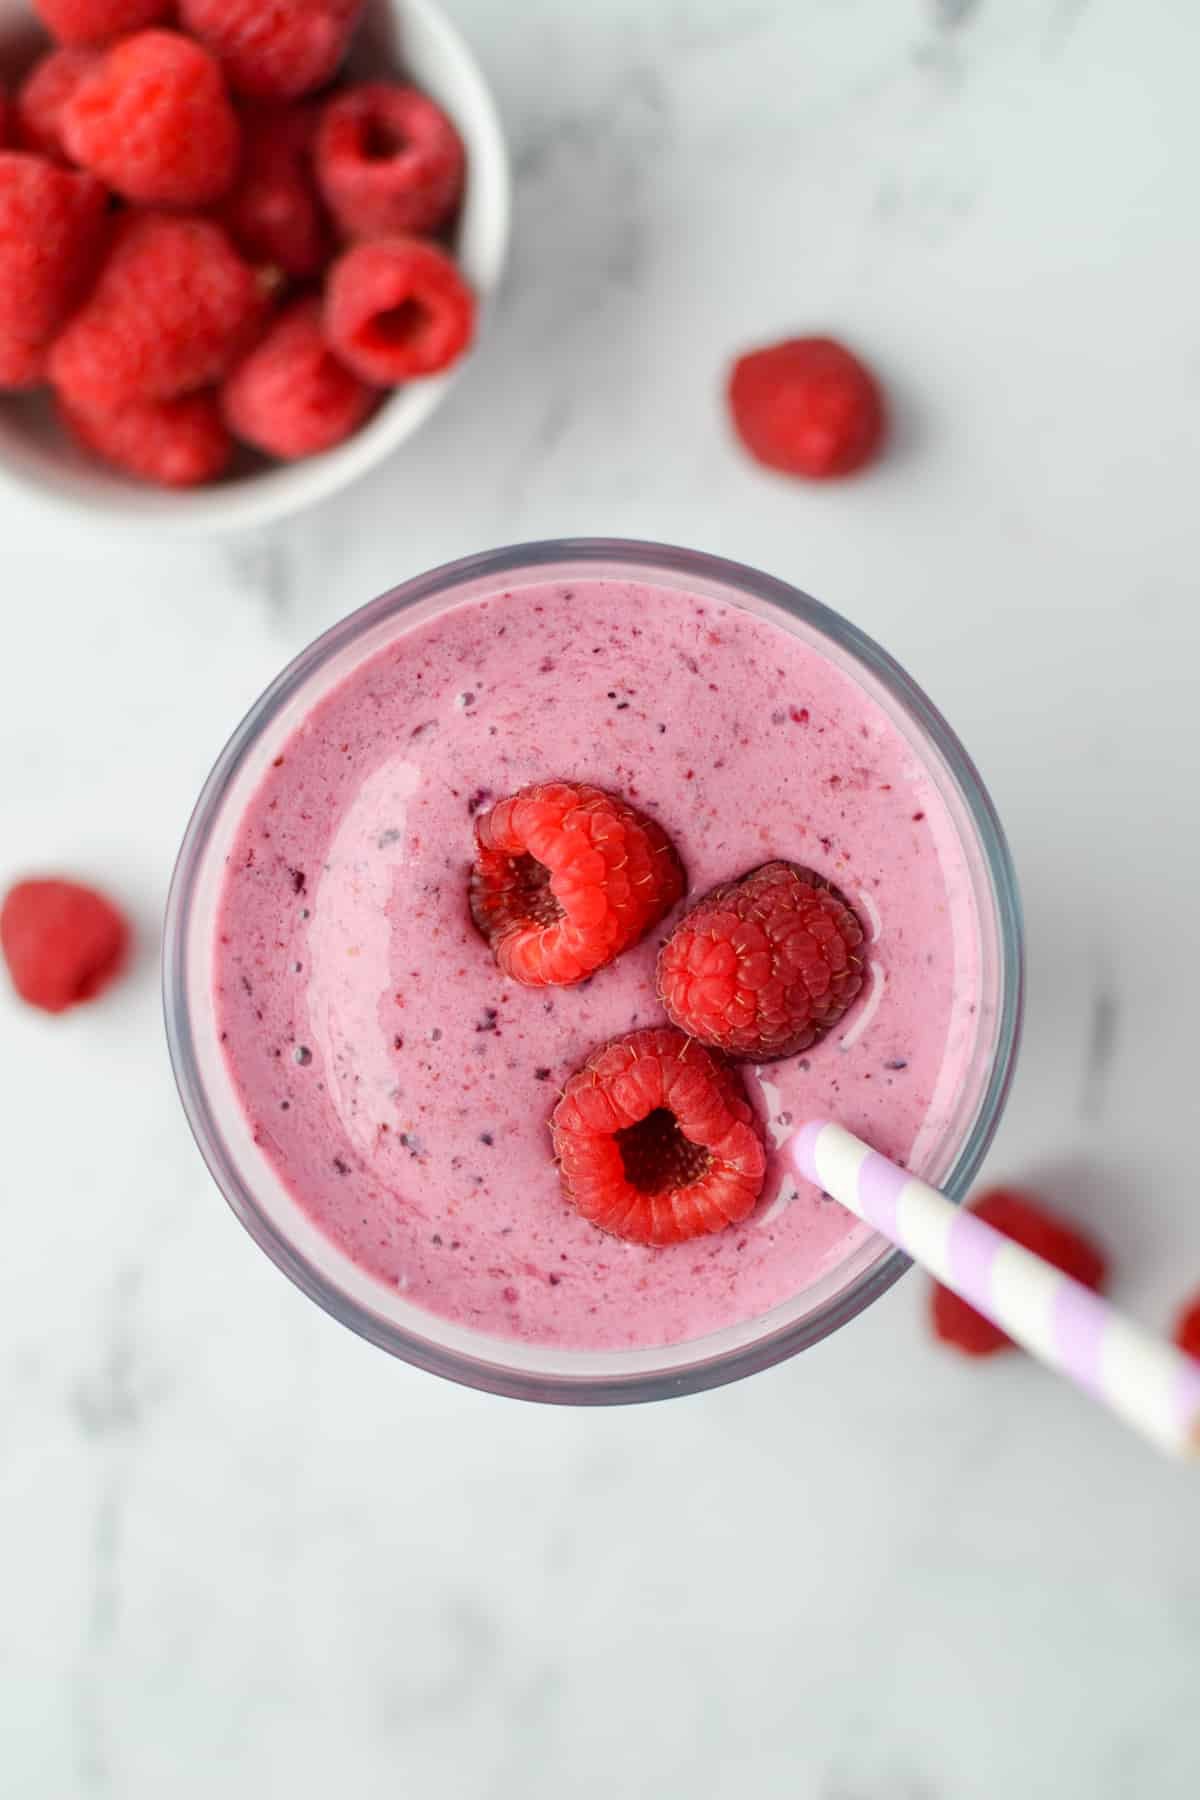 A glass filled with blended fruit and topped with fresh raspberries.